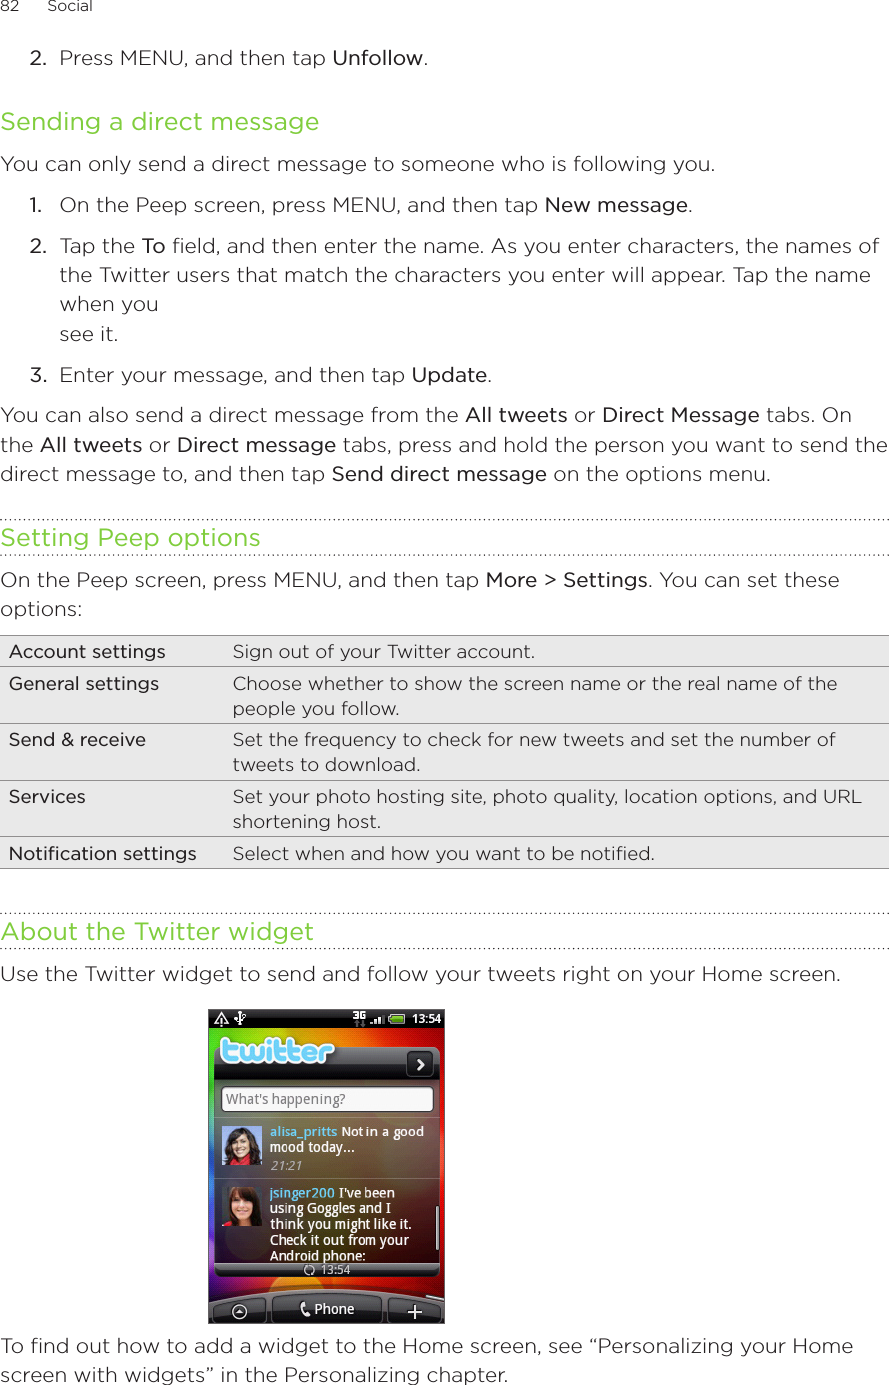 82      Social      Press MENU, and then tap Unfollow. Sending a direct messageYou can only send a direct message to someone who is following you.On the Peep screen, press MENU, and then tap New message.2.  Tap the To field, and then enter the name. As you enter characters, the names of the Twitter users that match the characters you enter will appear. Tap the name when you  see it. 3.  Enter your message, and then tap Update.You can also send a direct message from the All tweets or Direct Message tabs. On the All tweets or Direct message tabs, press and hold the person you want to send the direct message to, and then tap Send direct message on the options menu.Setting Peep optionsOn the Peep screen, press MENU, and then tap More &gt; Settings. You can set these options:Account settings Sign out of your Twitter account.General settings Choose whether to show the screen name or the real name of the people you follow.Send &amp; receive Set the frequency to check for new tweets and set the number of tweets to download.Services Set your photo hosting site, photo quality, location options, and URL shortening host.Notification settings Select when and how you want to be notified.About the Twitter widgetUse the Twitter widget to send and follow your tweets right on your Home screen.To find out how to add a widget to the Home screen, see “Personalizing your Home screen with widgets” in the Personalizing chapter.2.1.